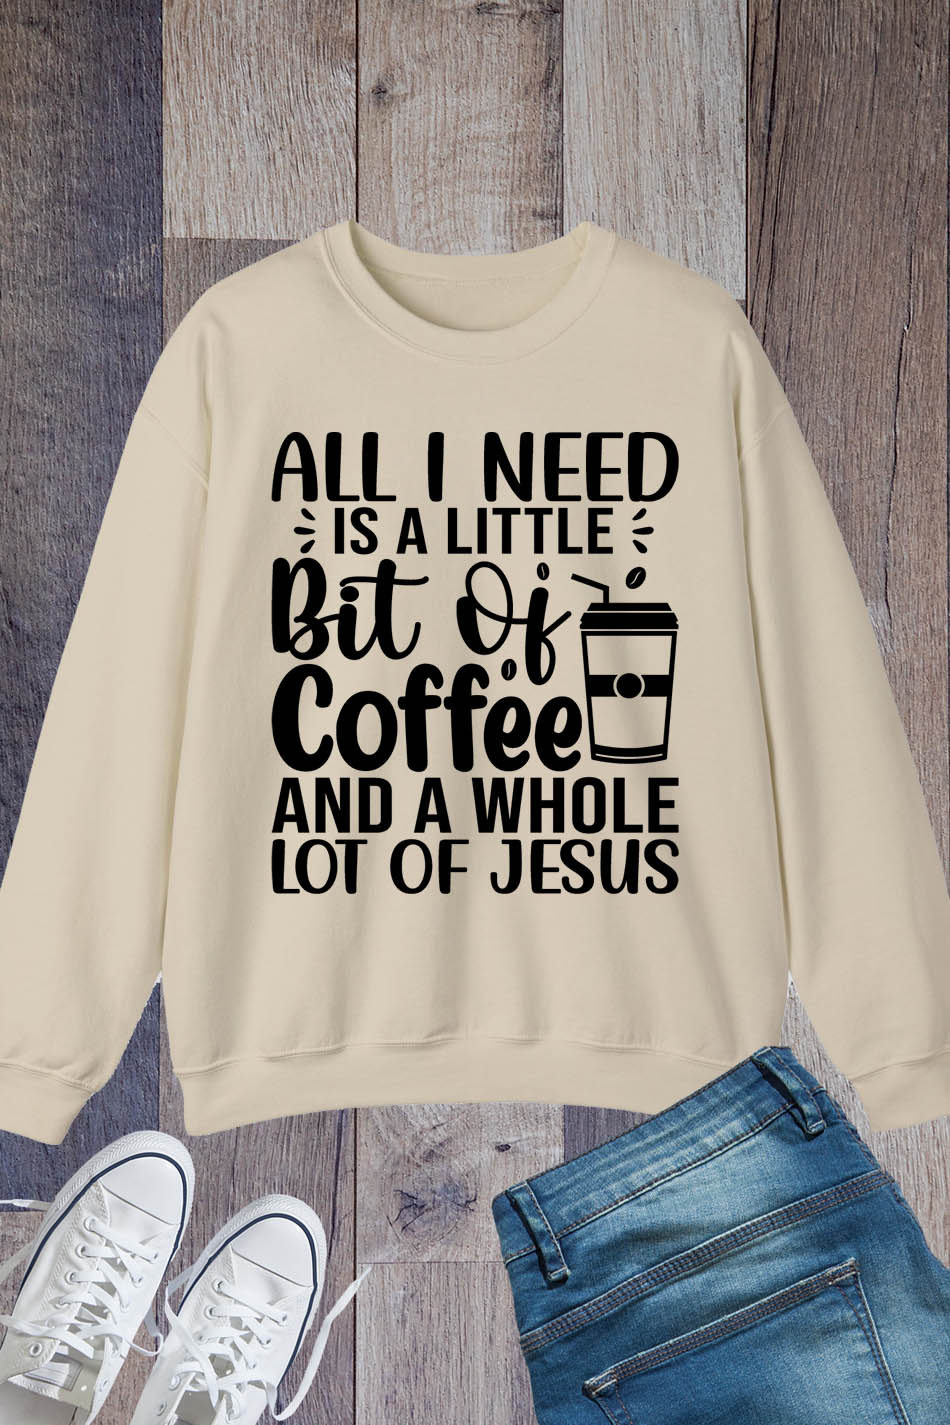 All I Need is a Little Bit of Coffee and Jesus Christian Sweatshirts